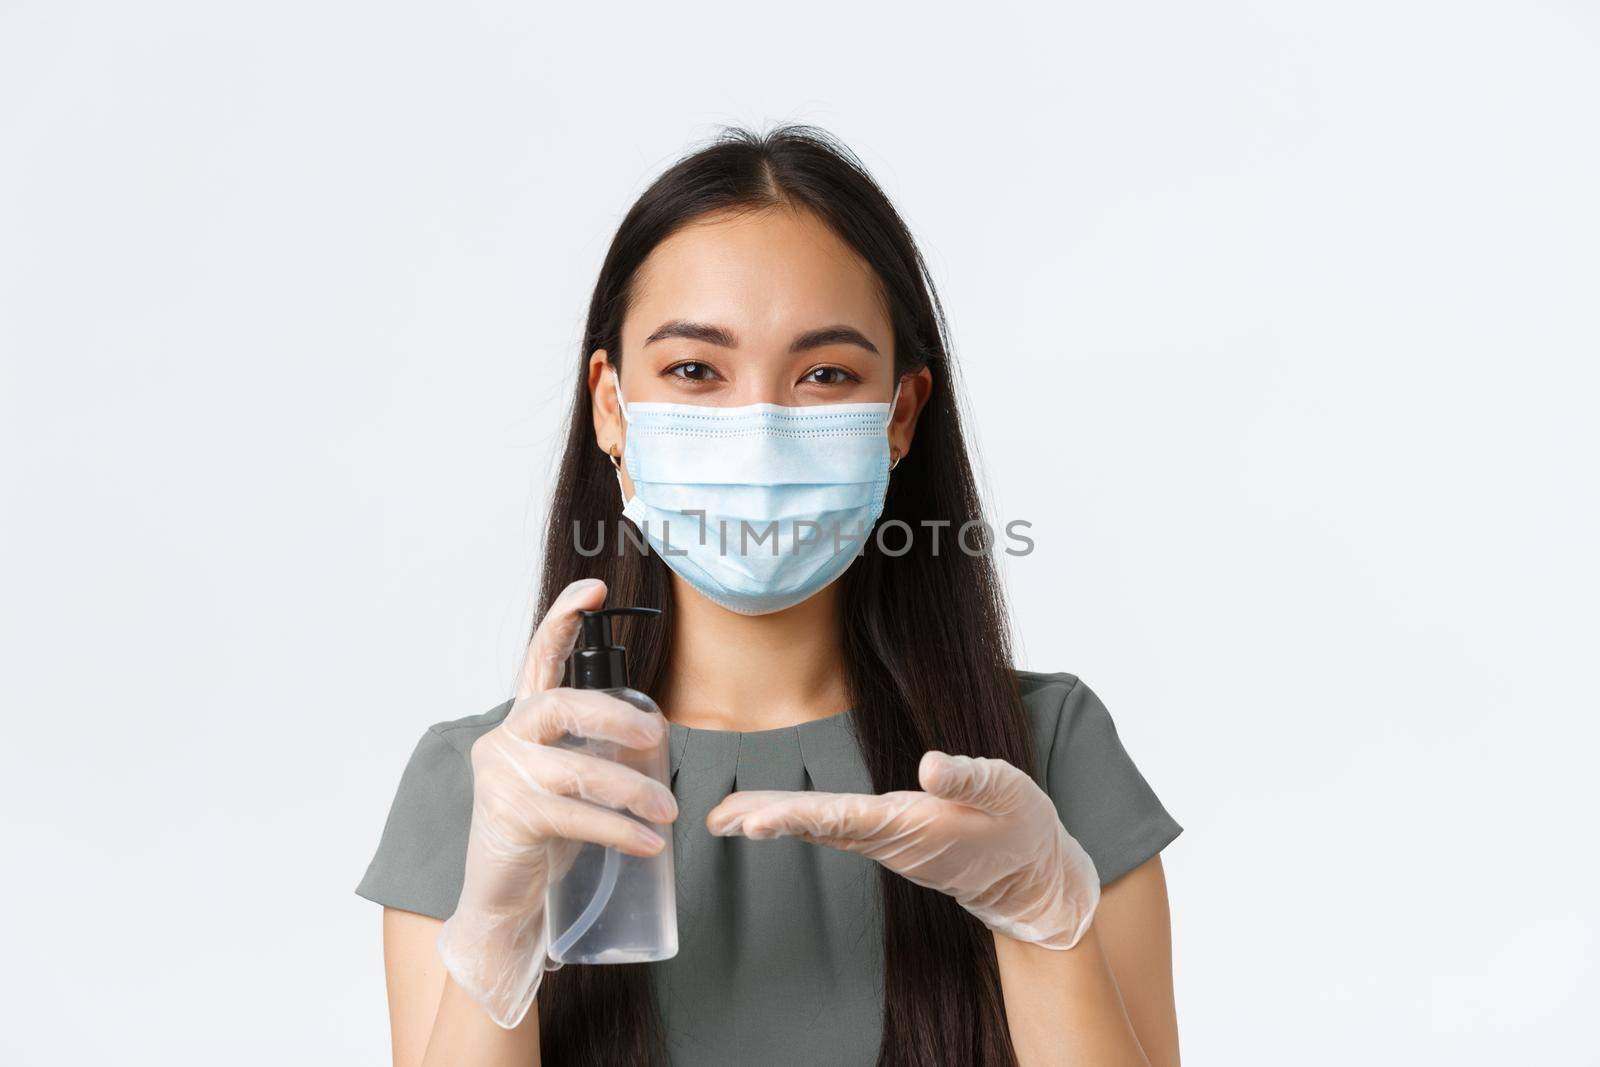 Small business owners, covid-19, preventing virus measures concept. Close-up of smiling asian woman in medical mask and gloves desinfecting it with hand sanitizer before packing customer order.